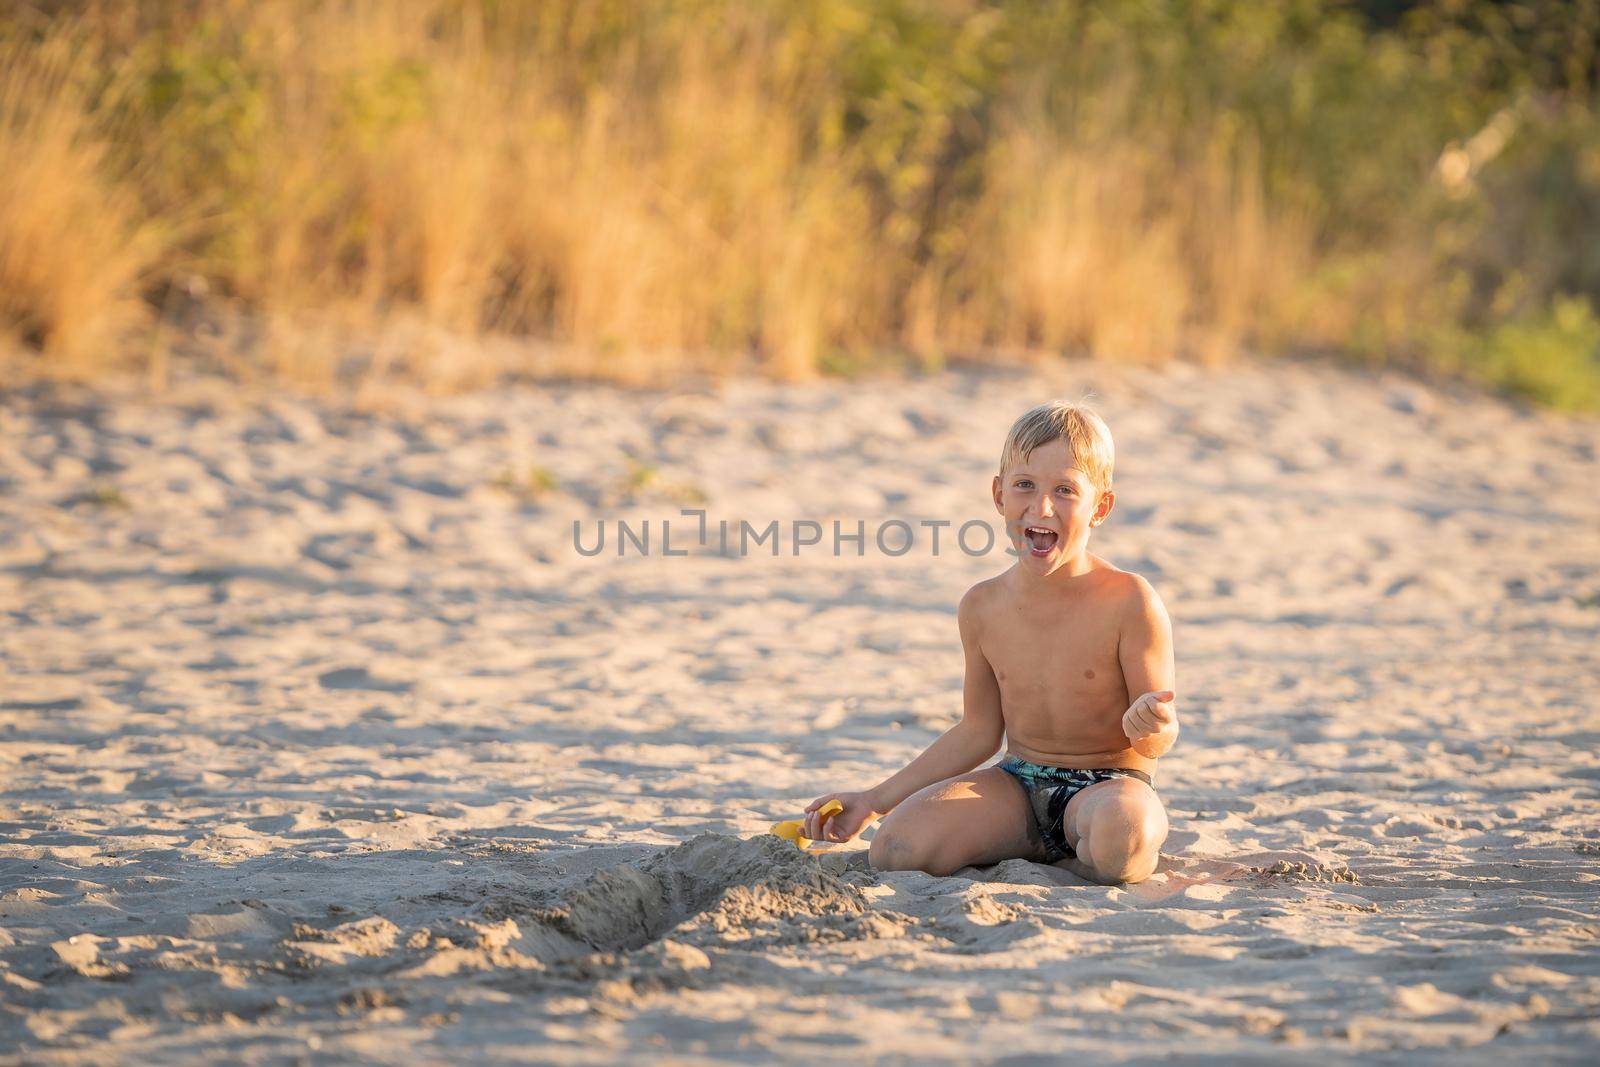 Little boy laughing on the beach summer holidays by Robertobinetti70